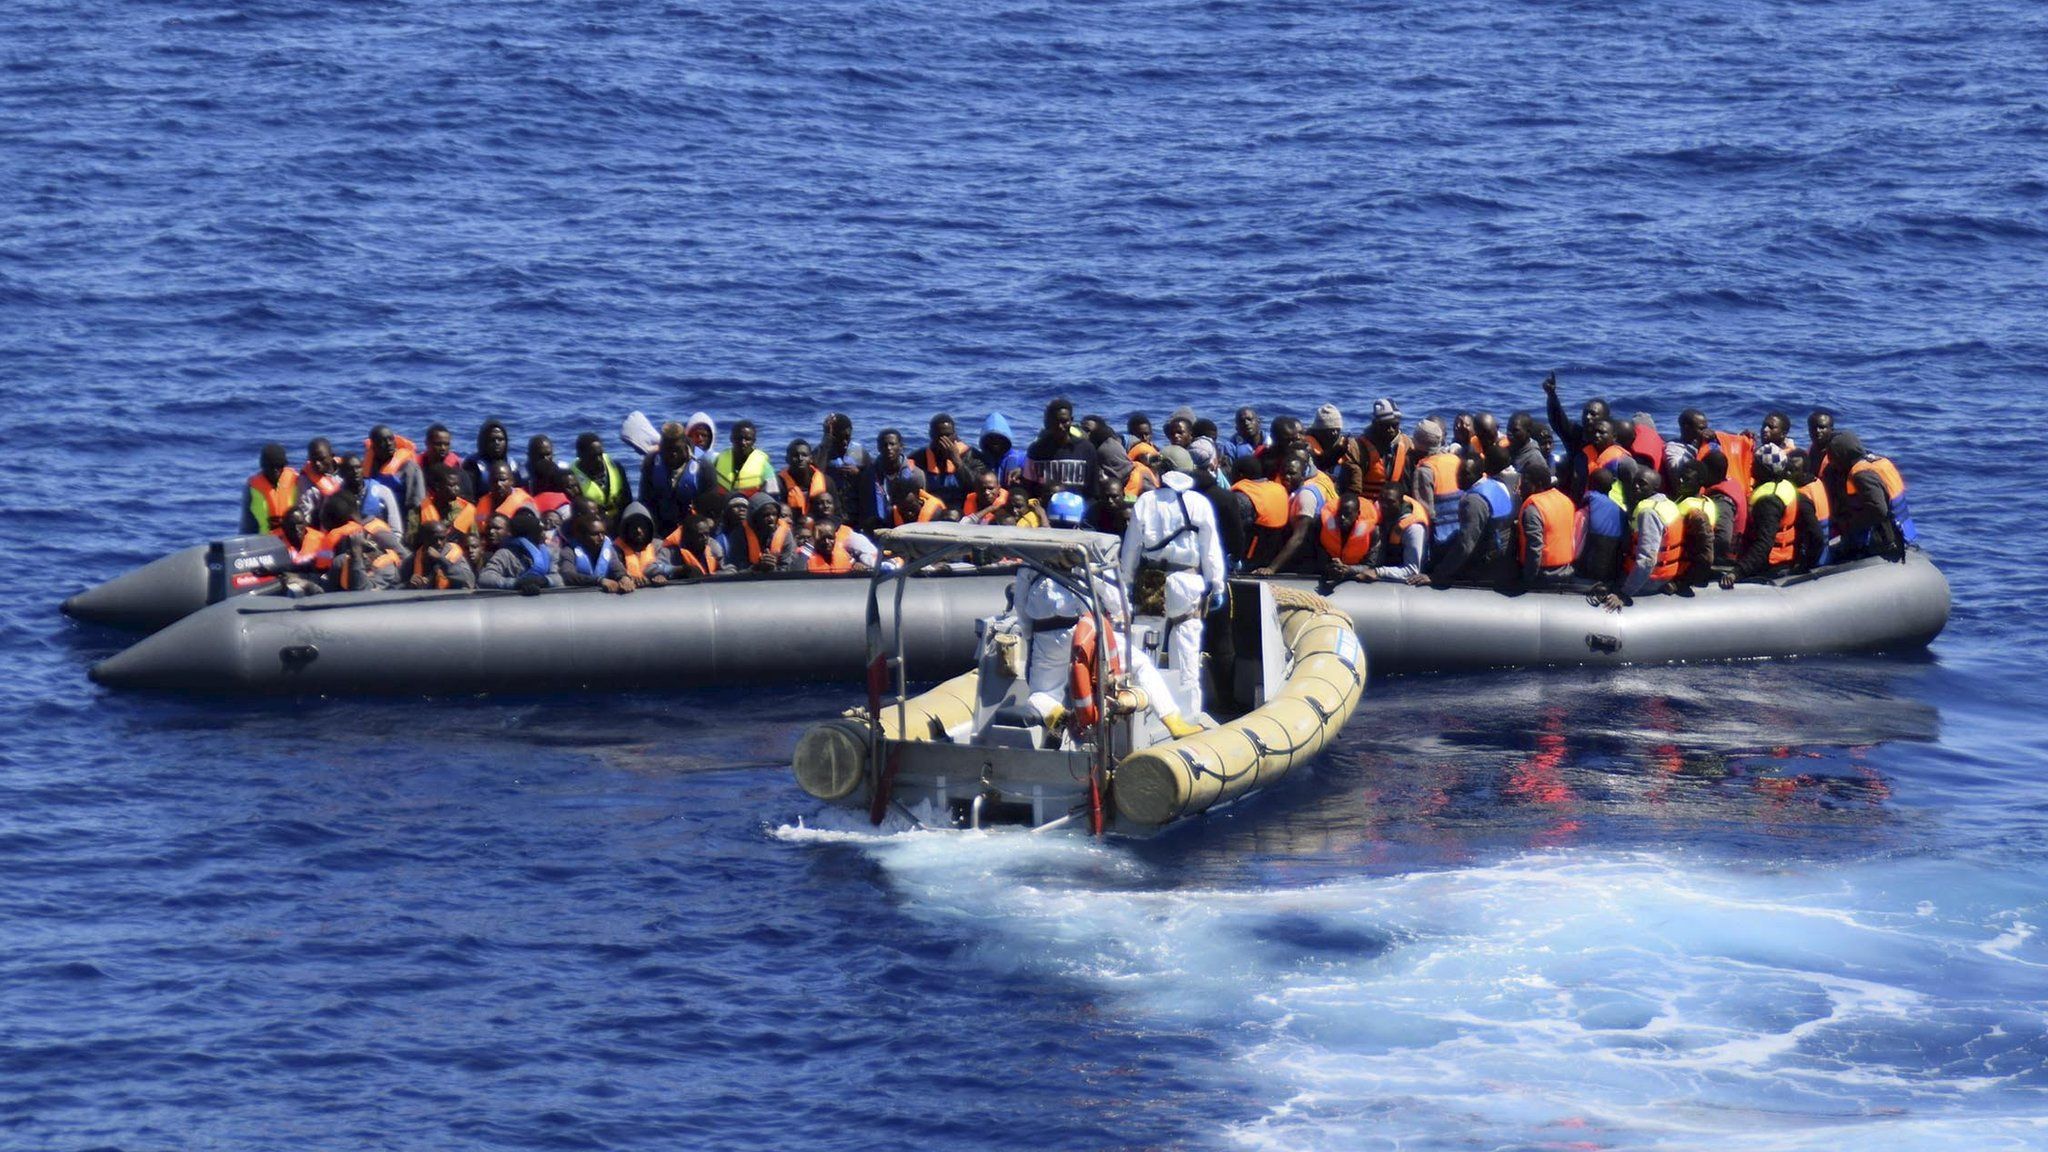 Migrants sit in their boat during a rescue operation by Italian Navy vessels off the coast of Sicily (11 April 2016) (Italian Navy handout)